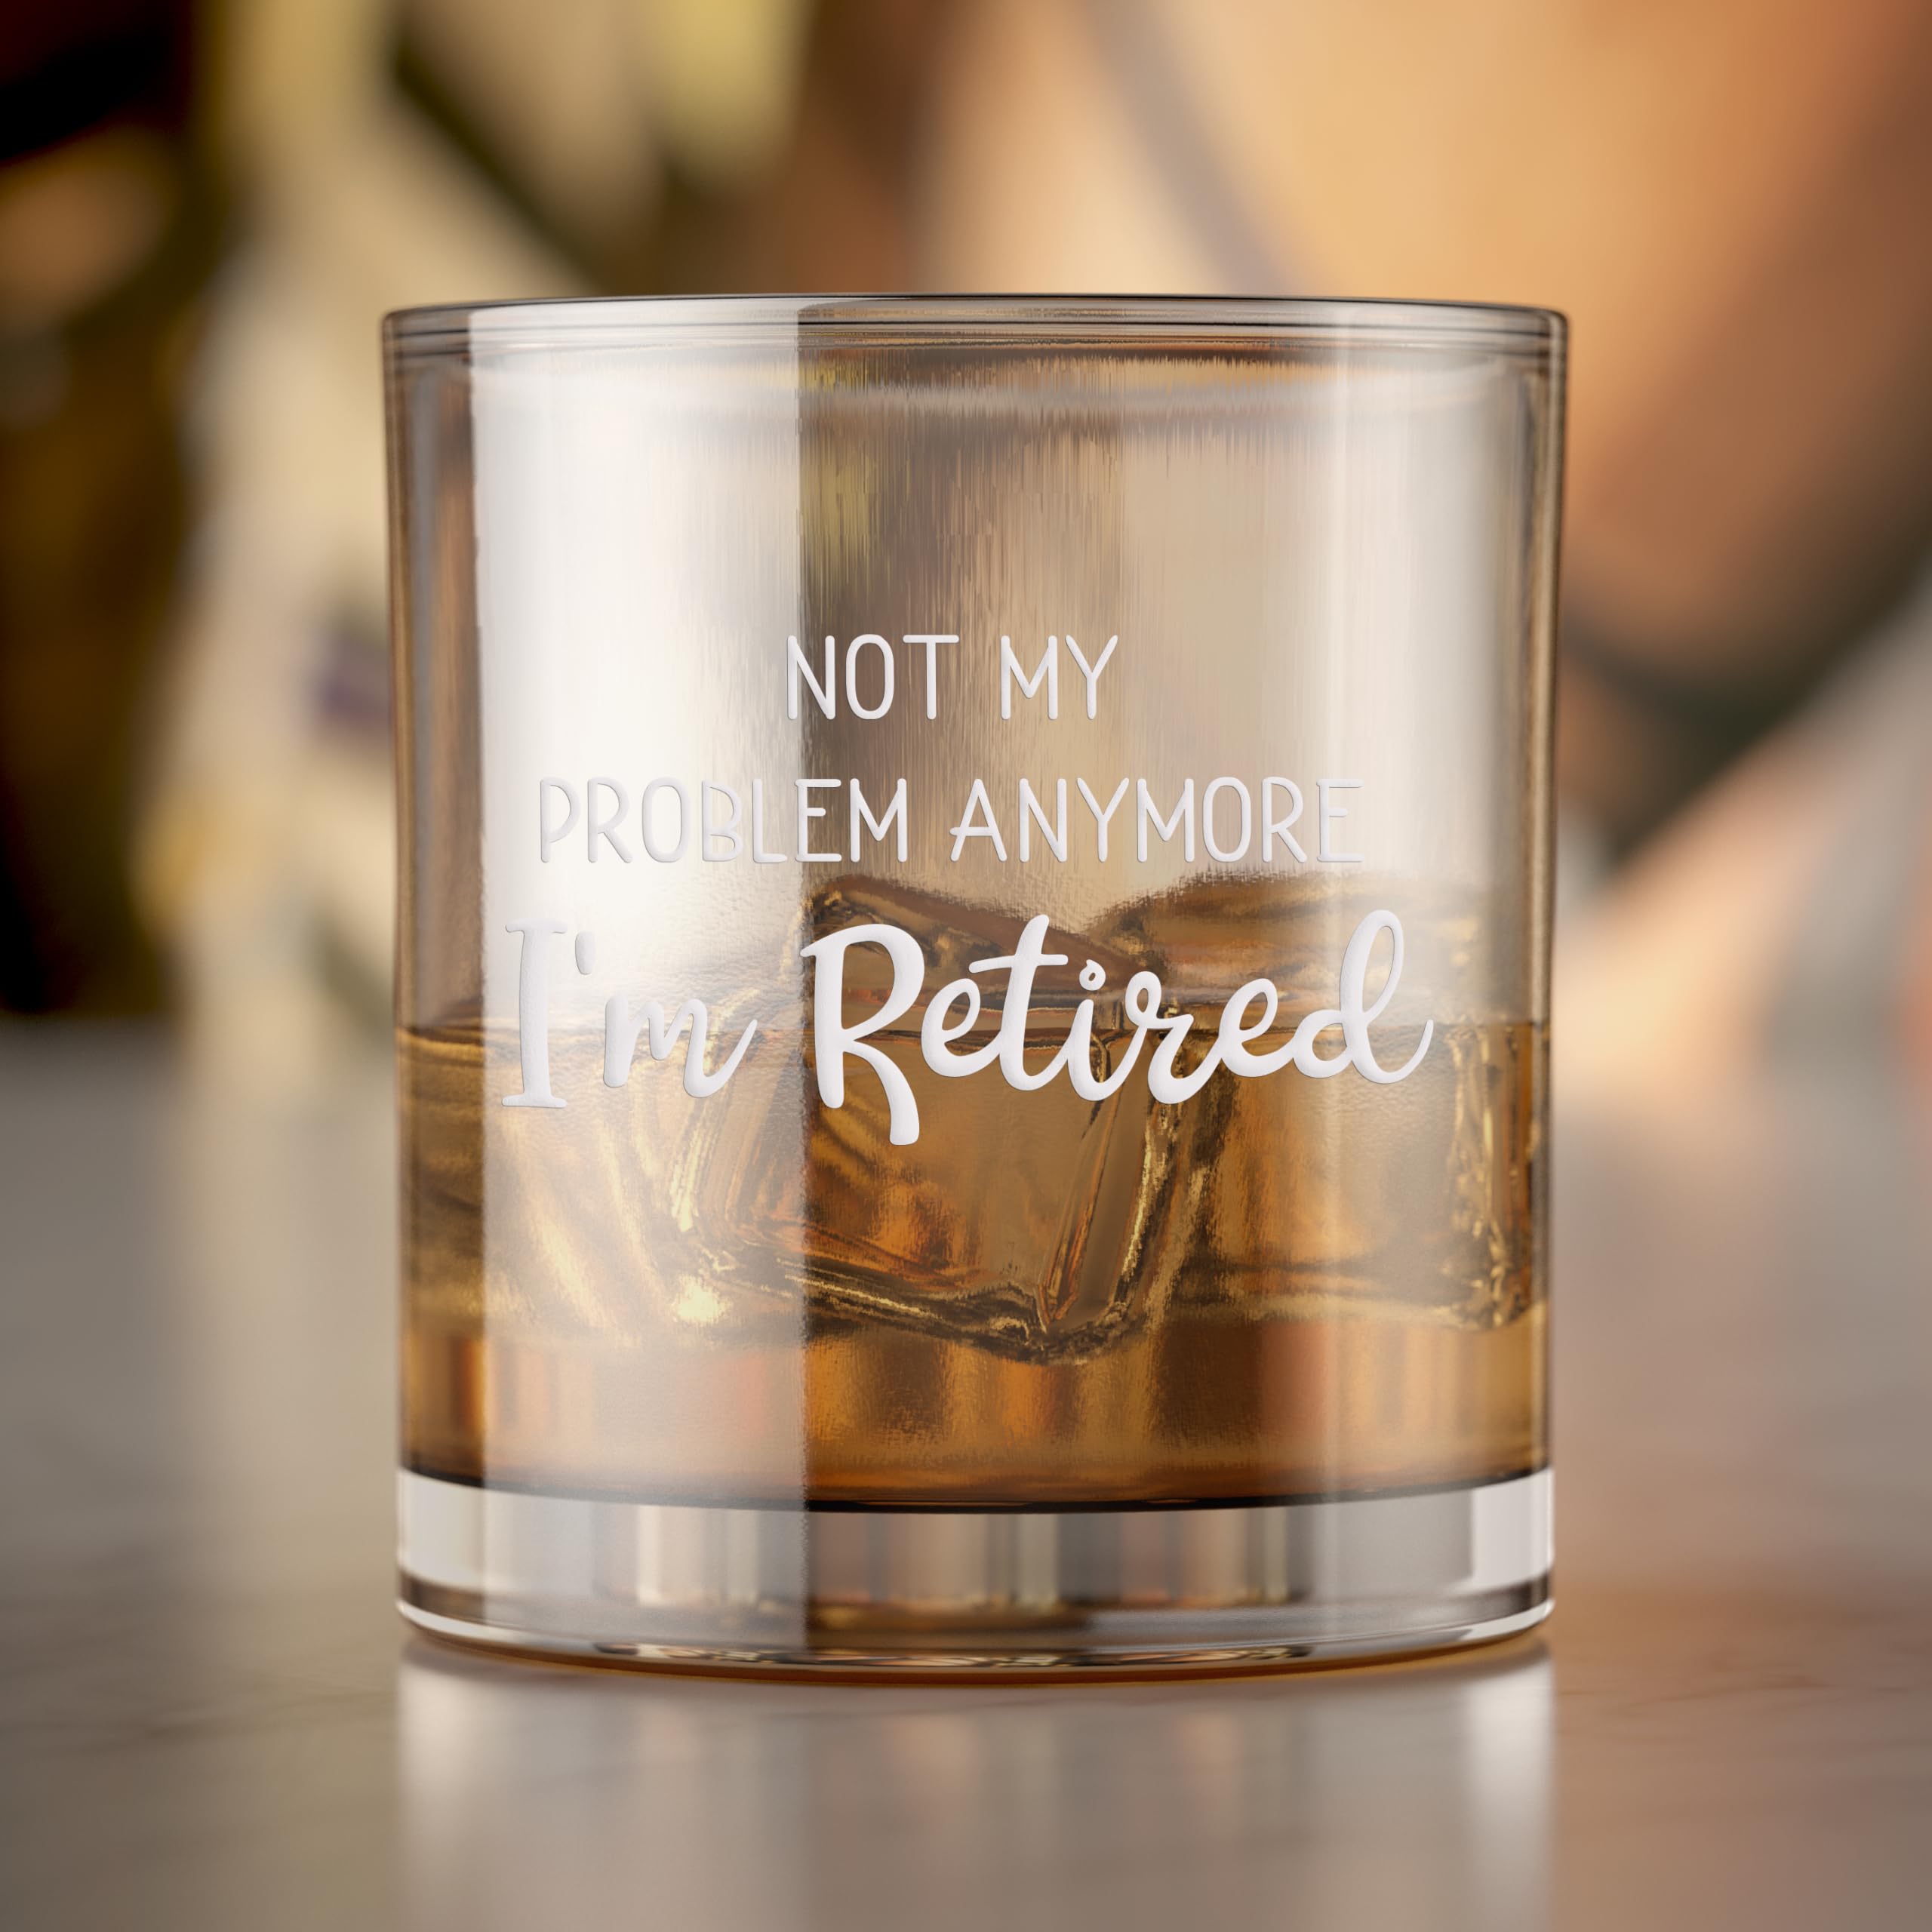 Not My Problem Anymore Im Retired Round Rocks Glass - Retired Gift, Just Retired Glass, Gift For Retirement, Old Fashioned Glass